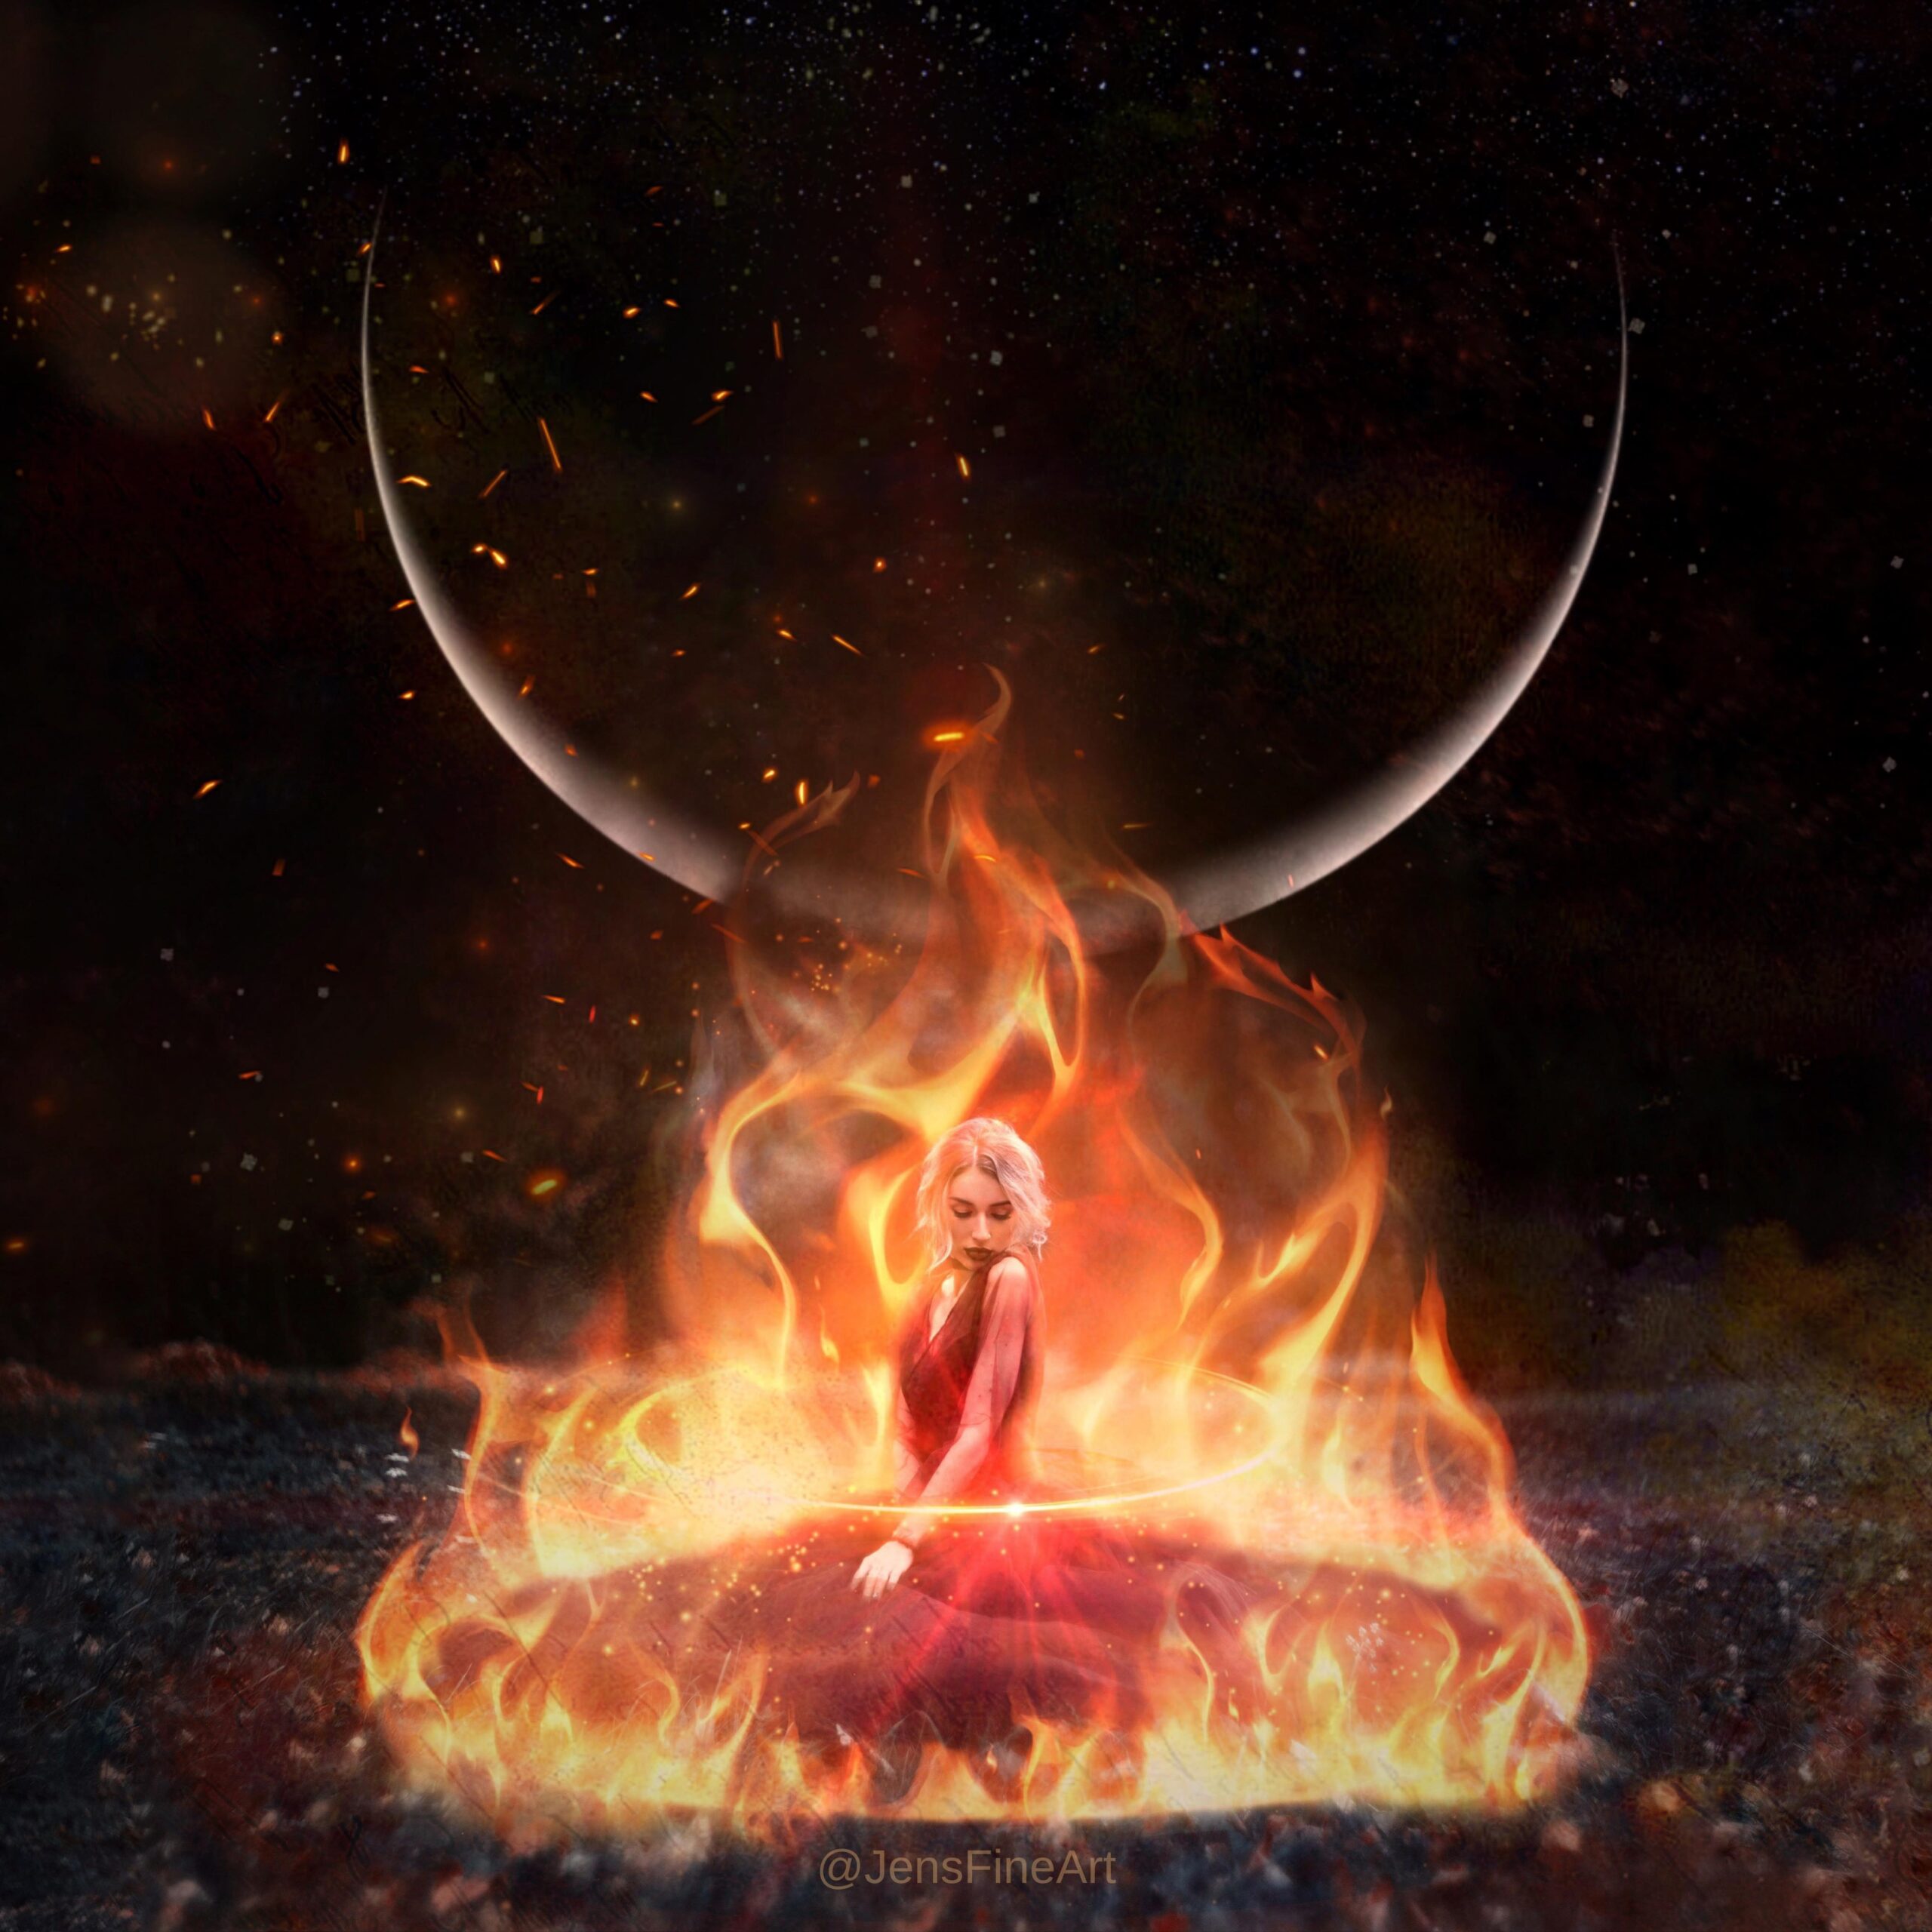 Aries New Moon: Igniting our Fire, Healing Old Wounds & Beginning Again